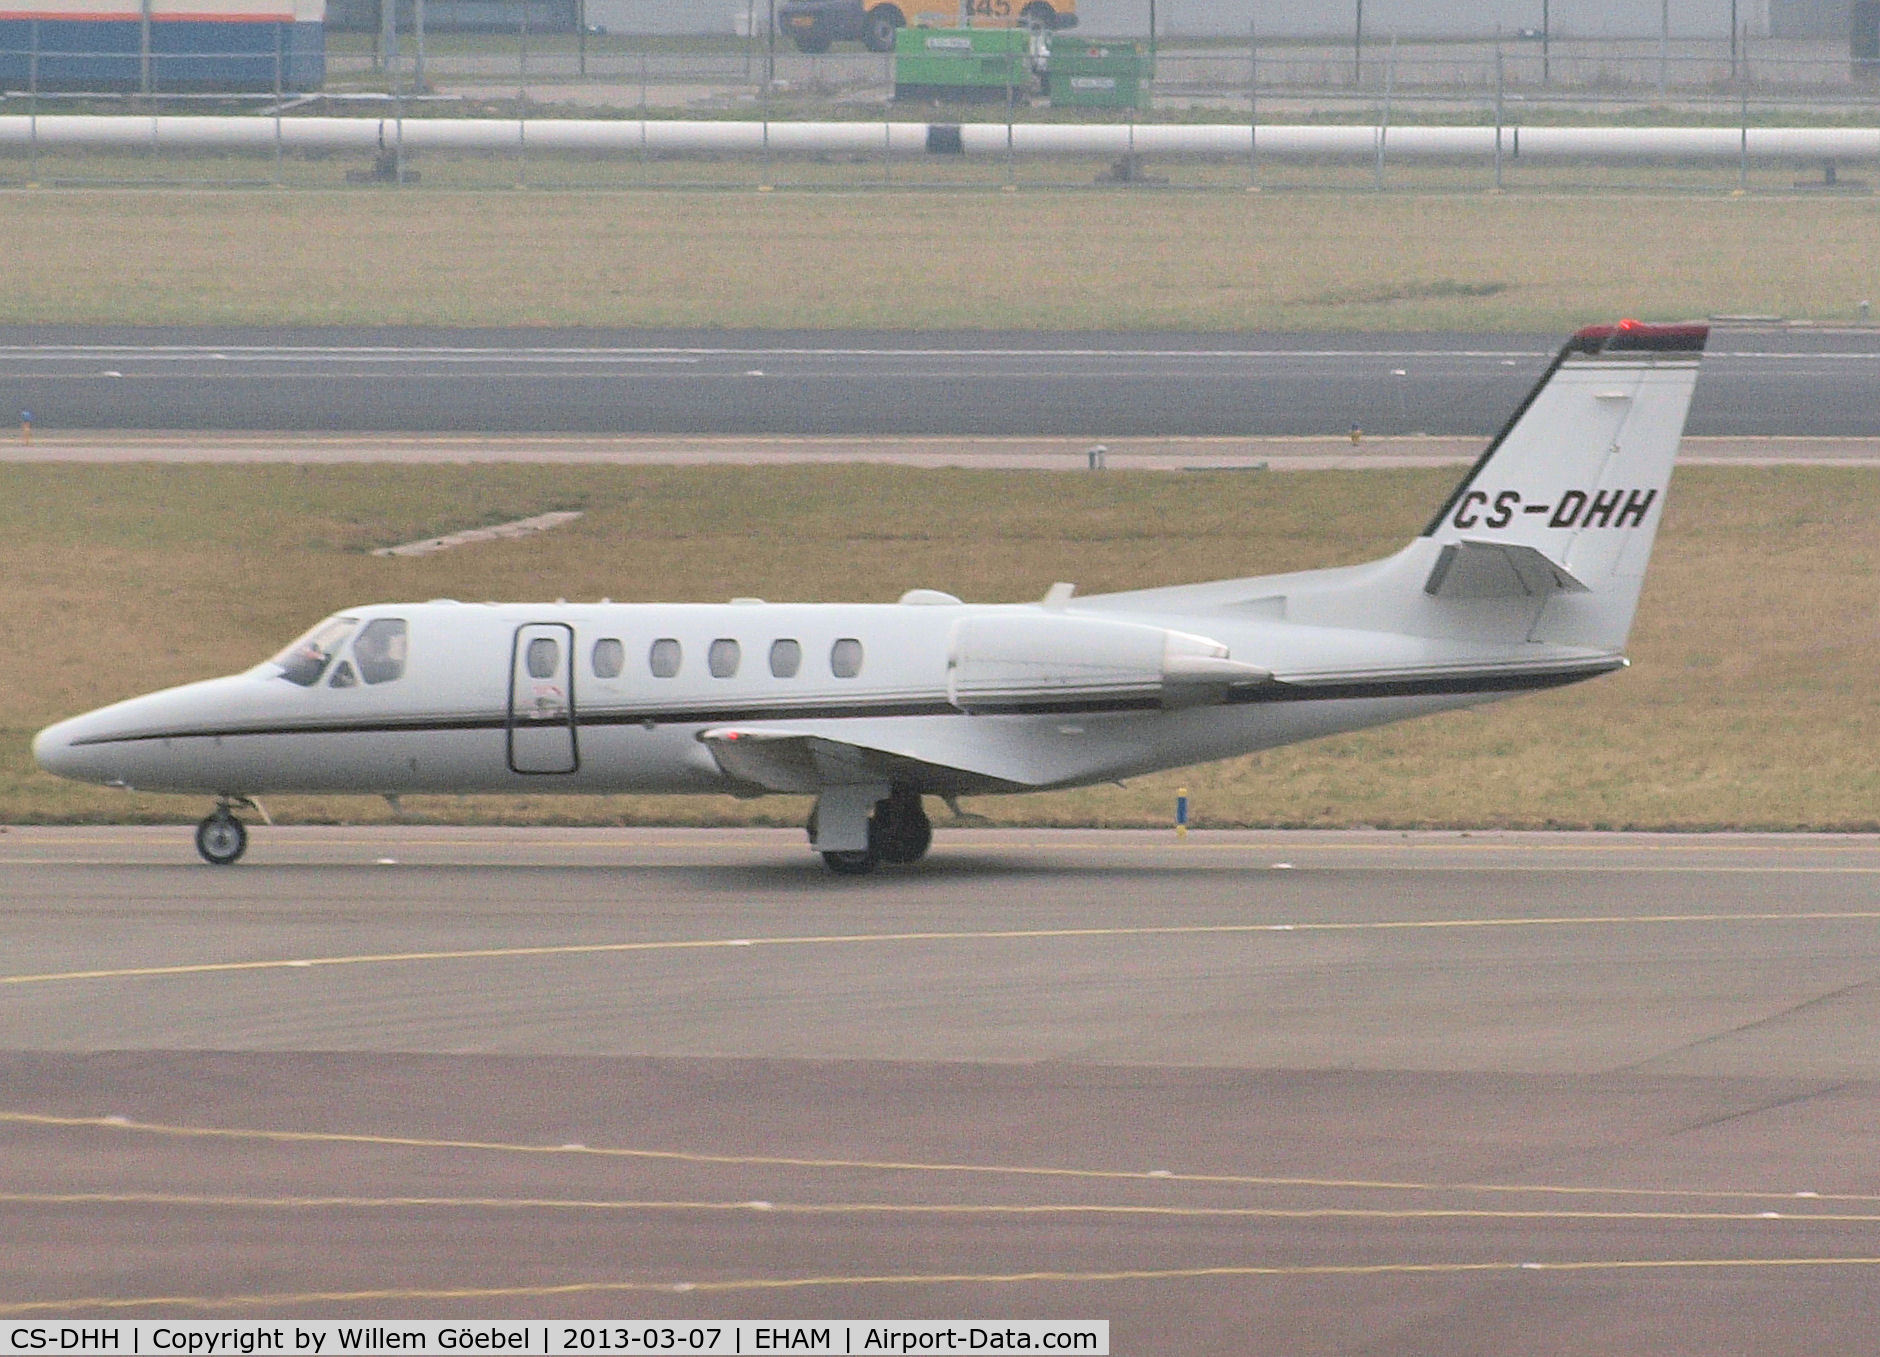 CS-DHH, 2002 Cessna 550 Citation Bravo C/N 550-1043, Taxi to the gate of Schiphol Airport